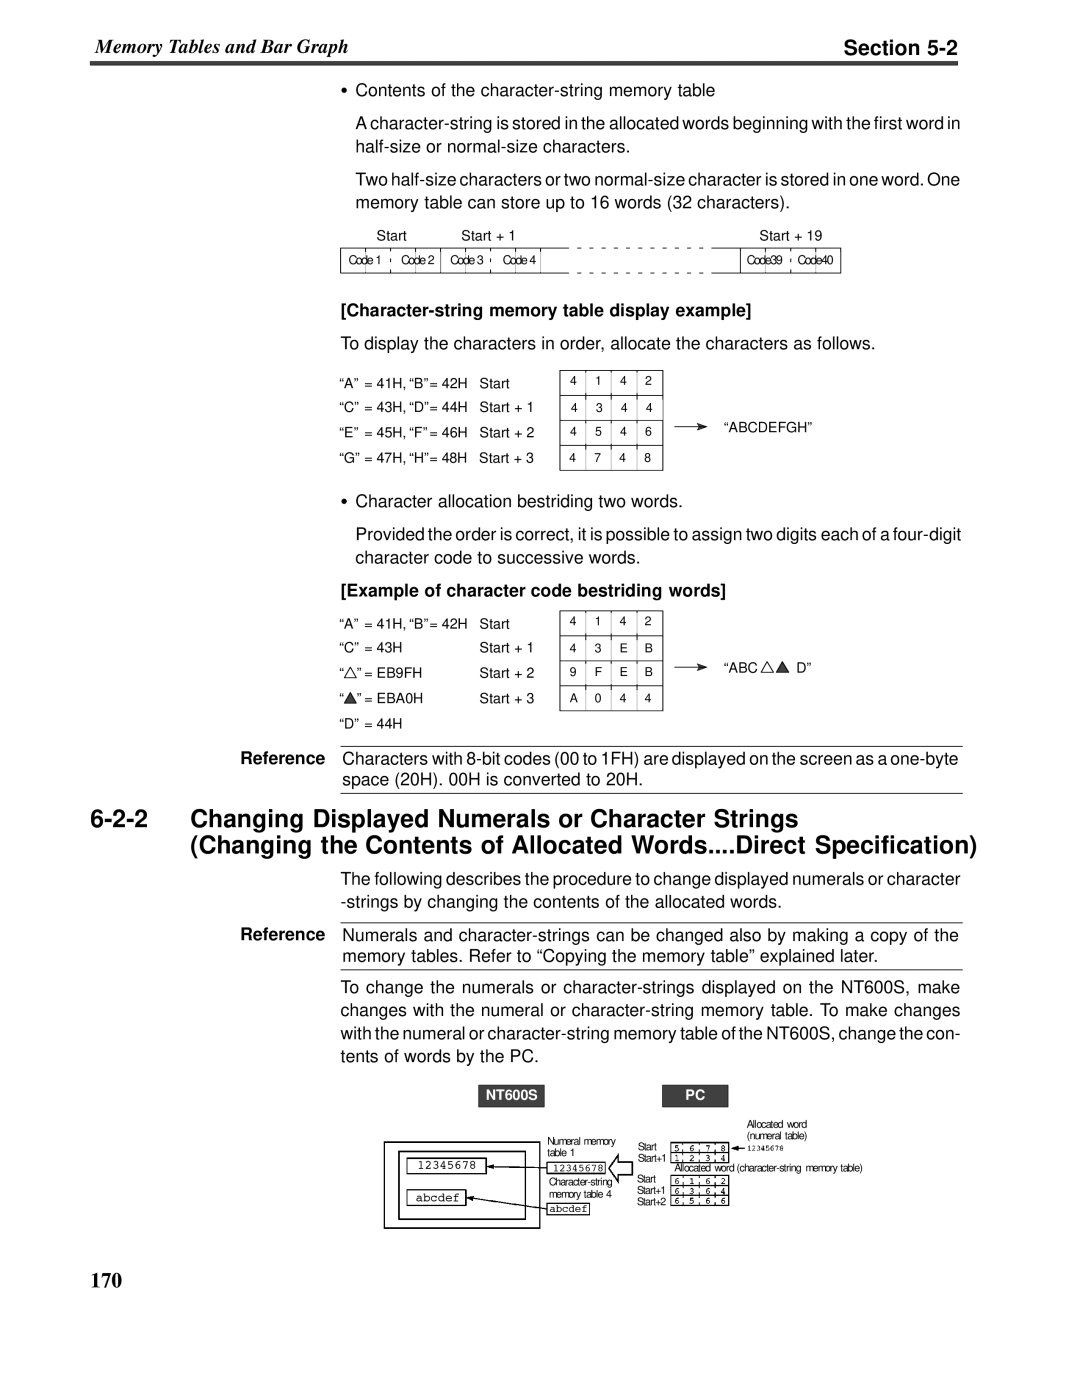 Omron V022-E3-1 operation manual Character-stringmemory table display example, Example of character code bestriding words 